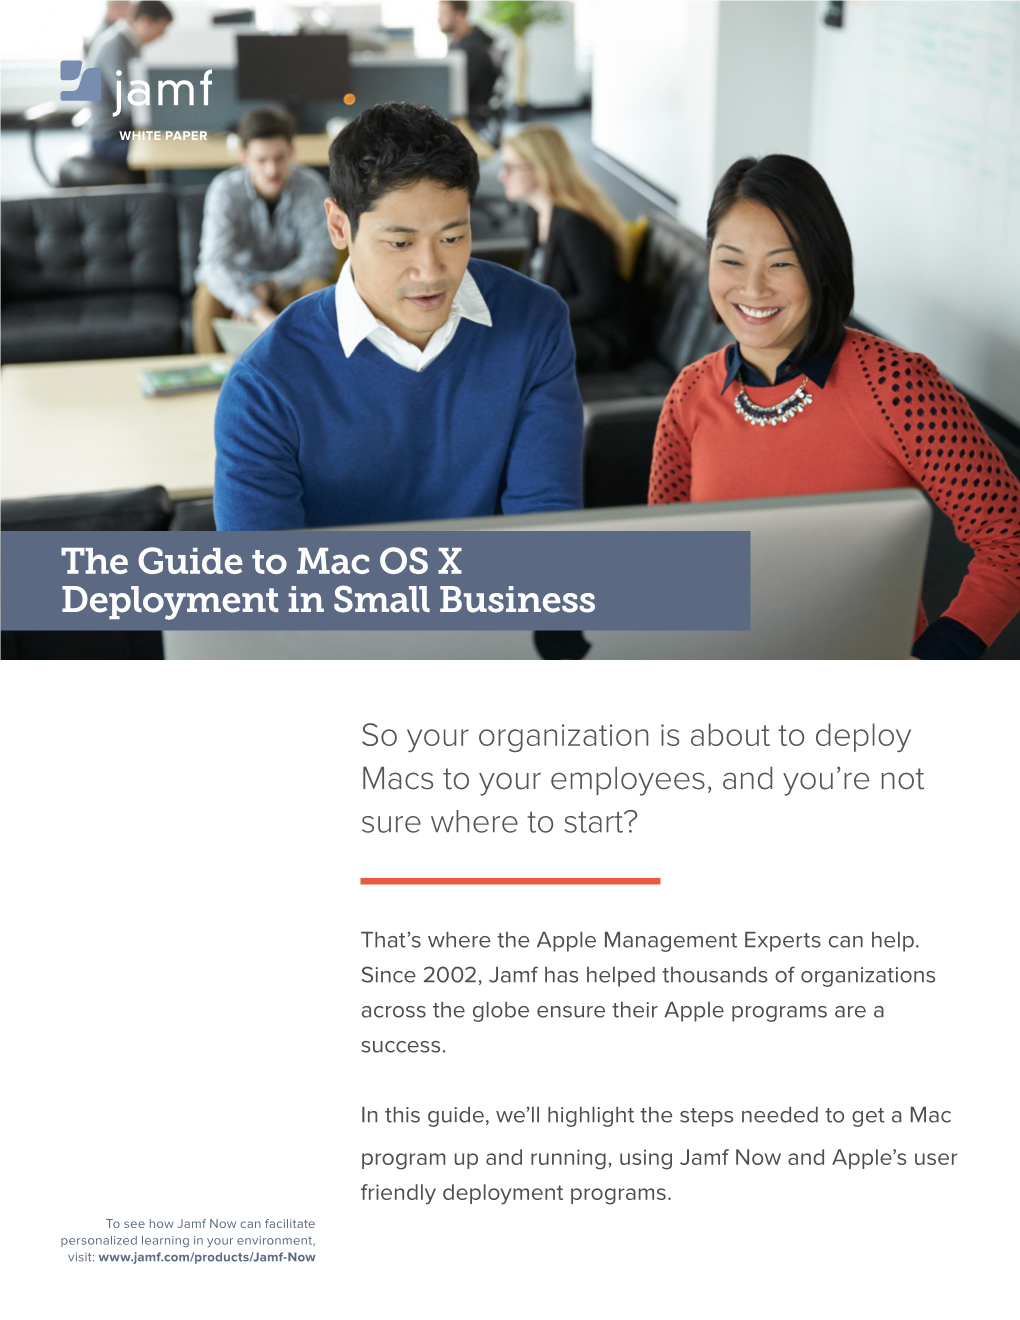 The Guide to Mac OS X Deployment in Small Business